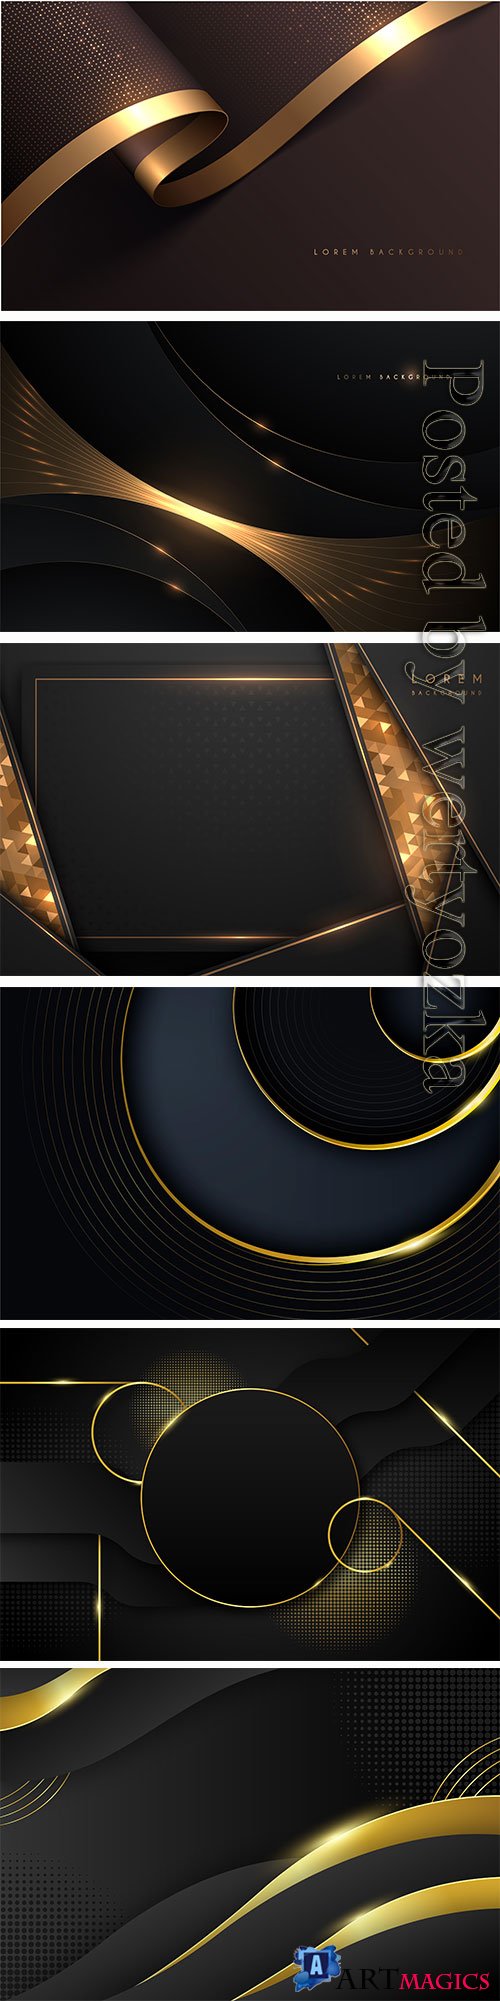 Luxury black abstract background with golden lines